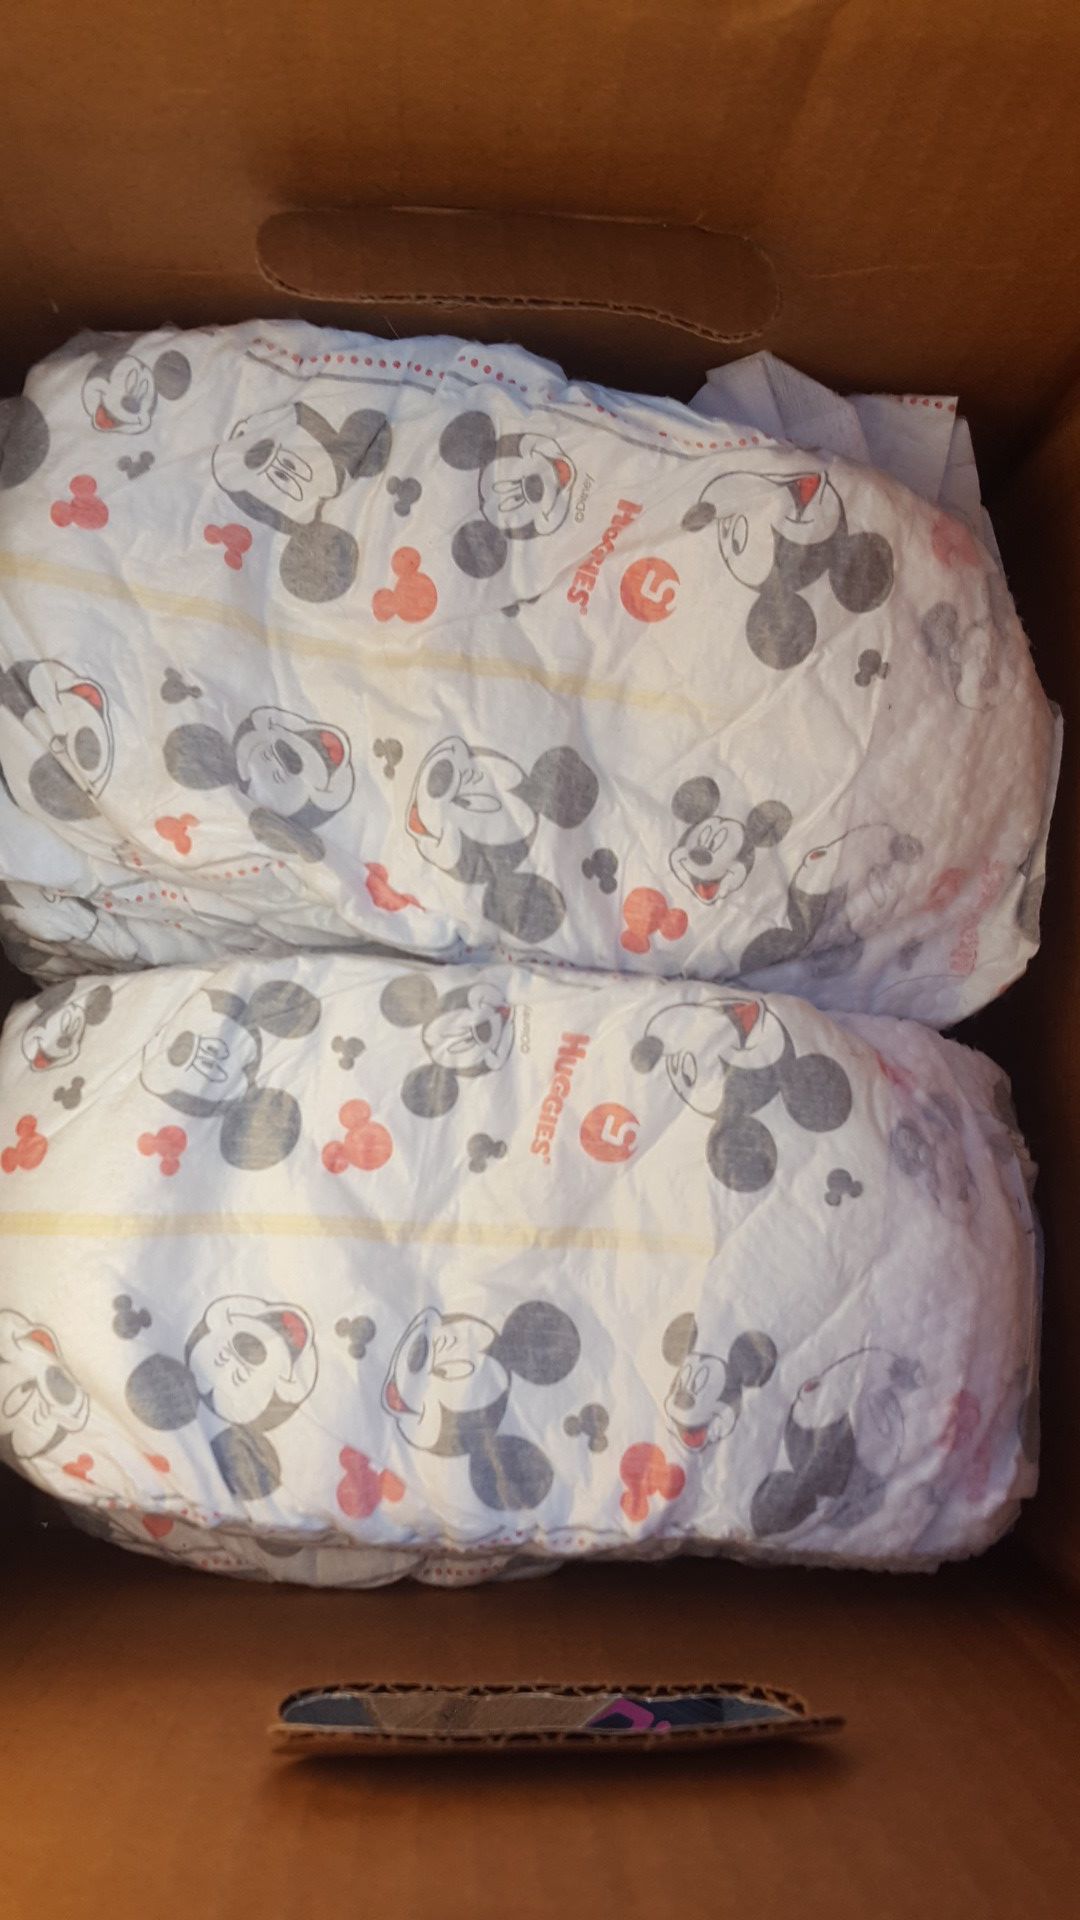 Size 5 pampers, and jumbo pack pampers easy ups